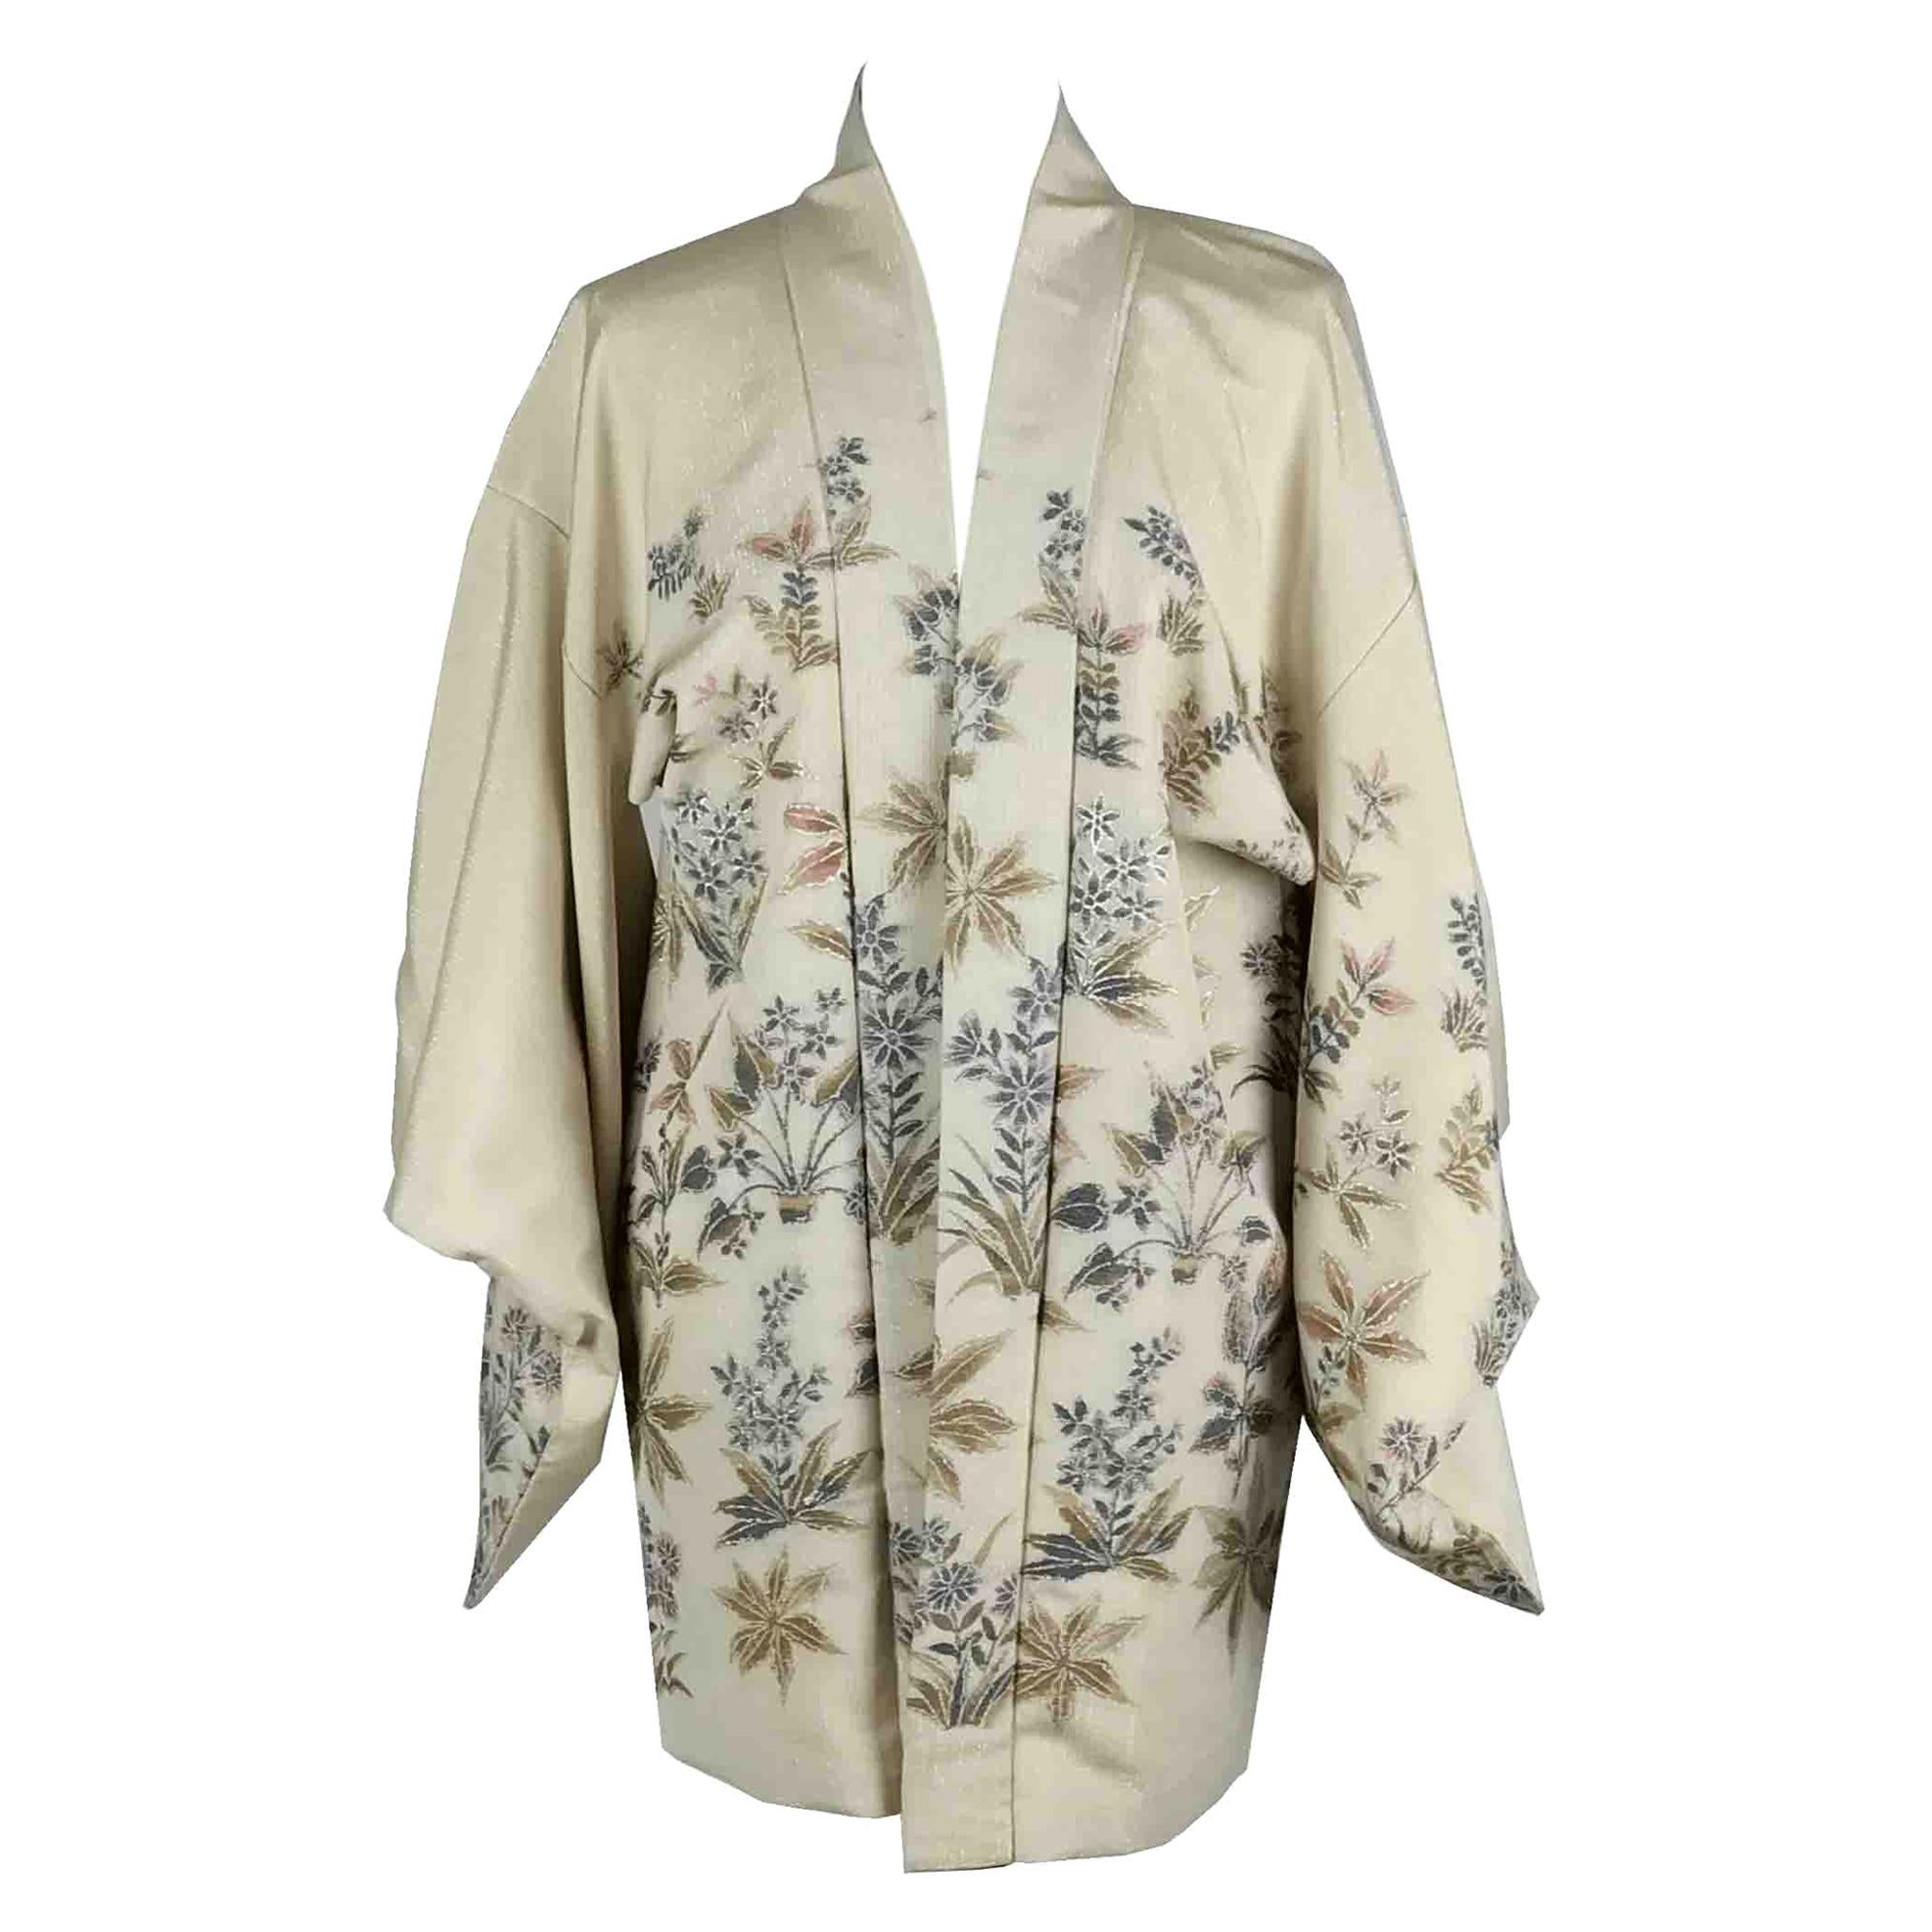 Short kimono woven with beautiful silver and gold threads exploding fireworks